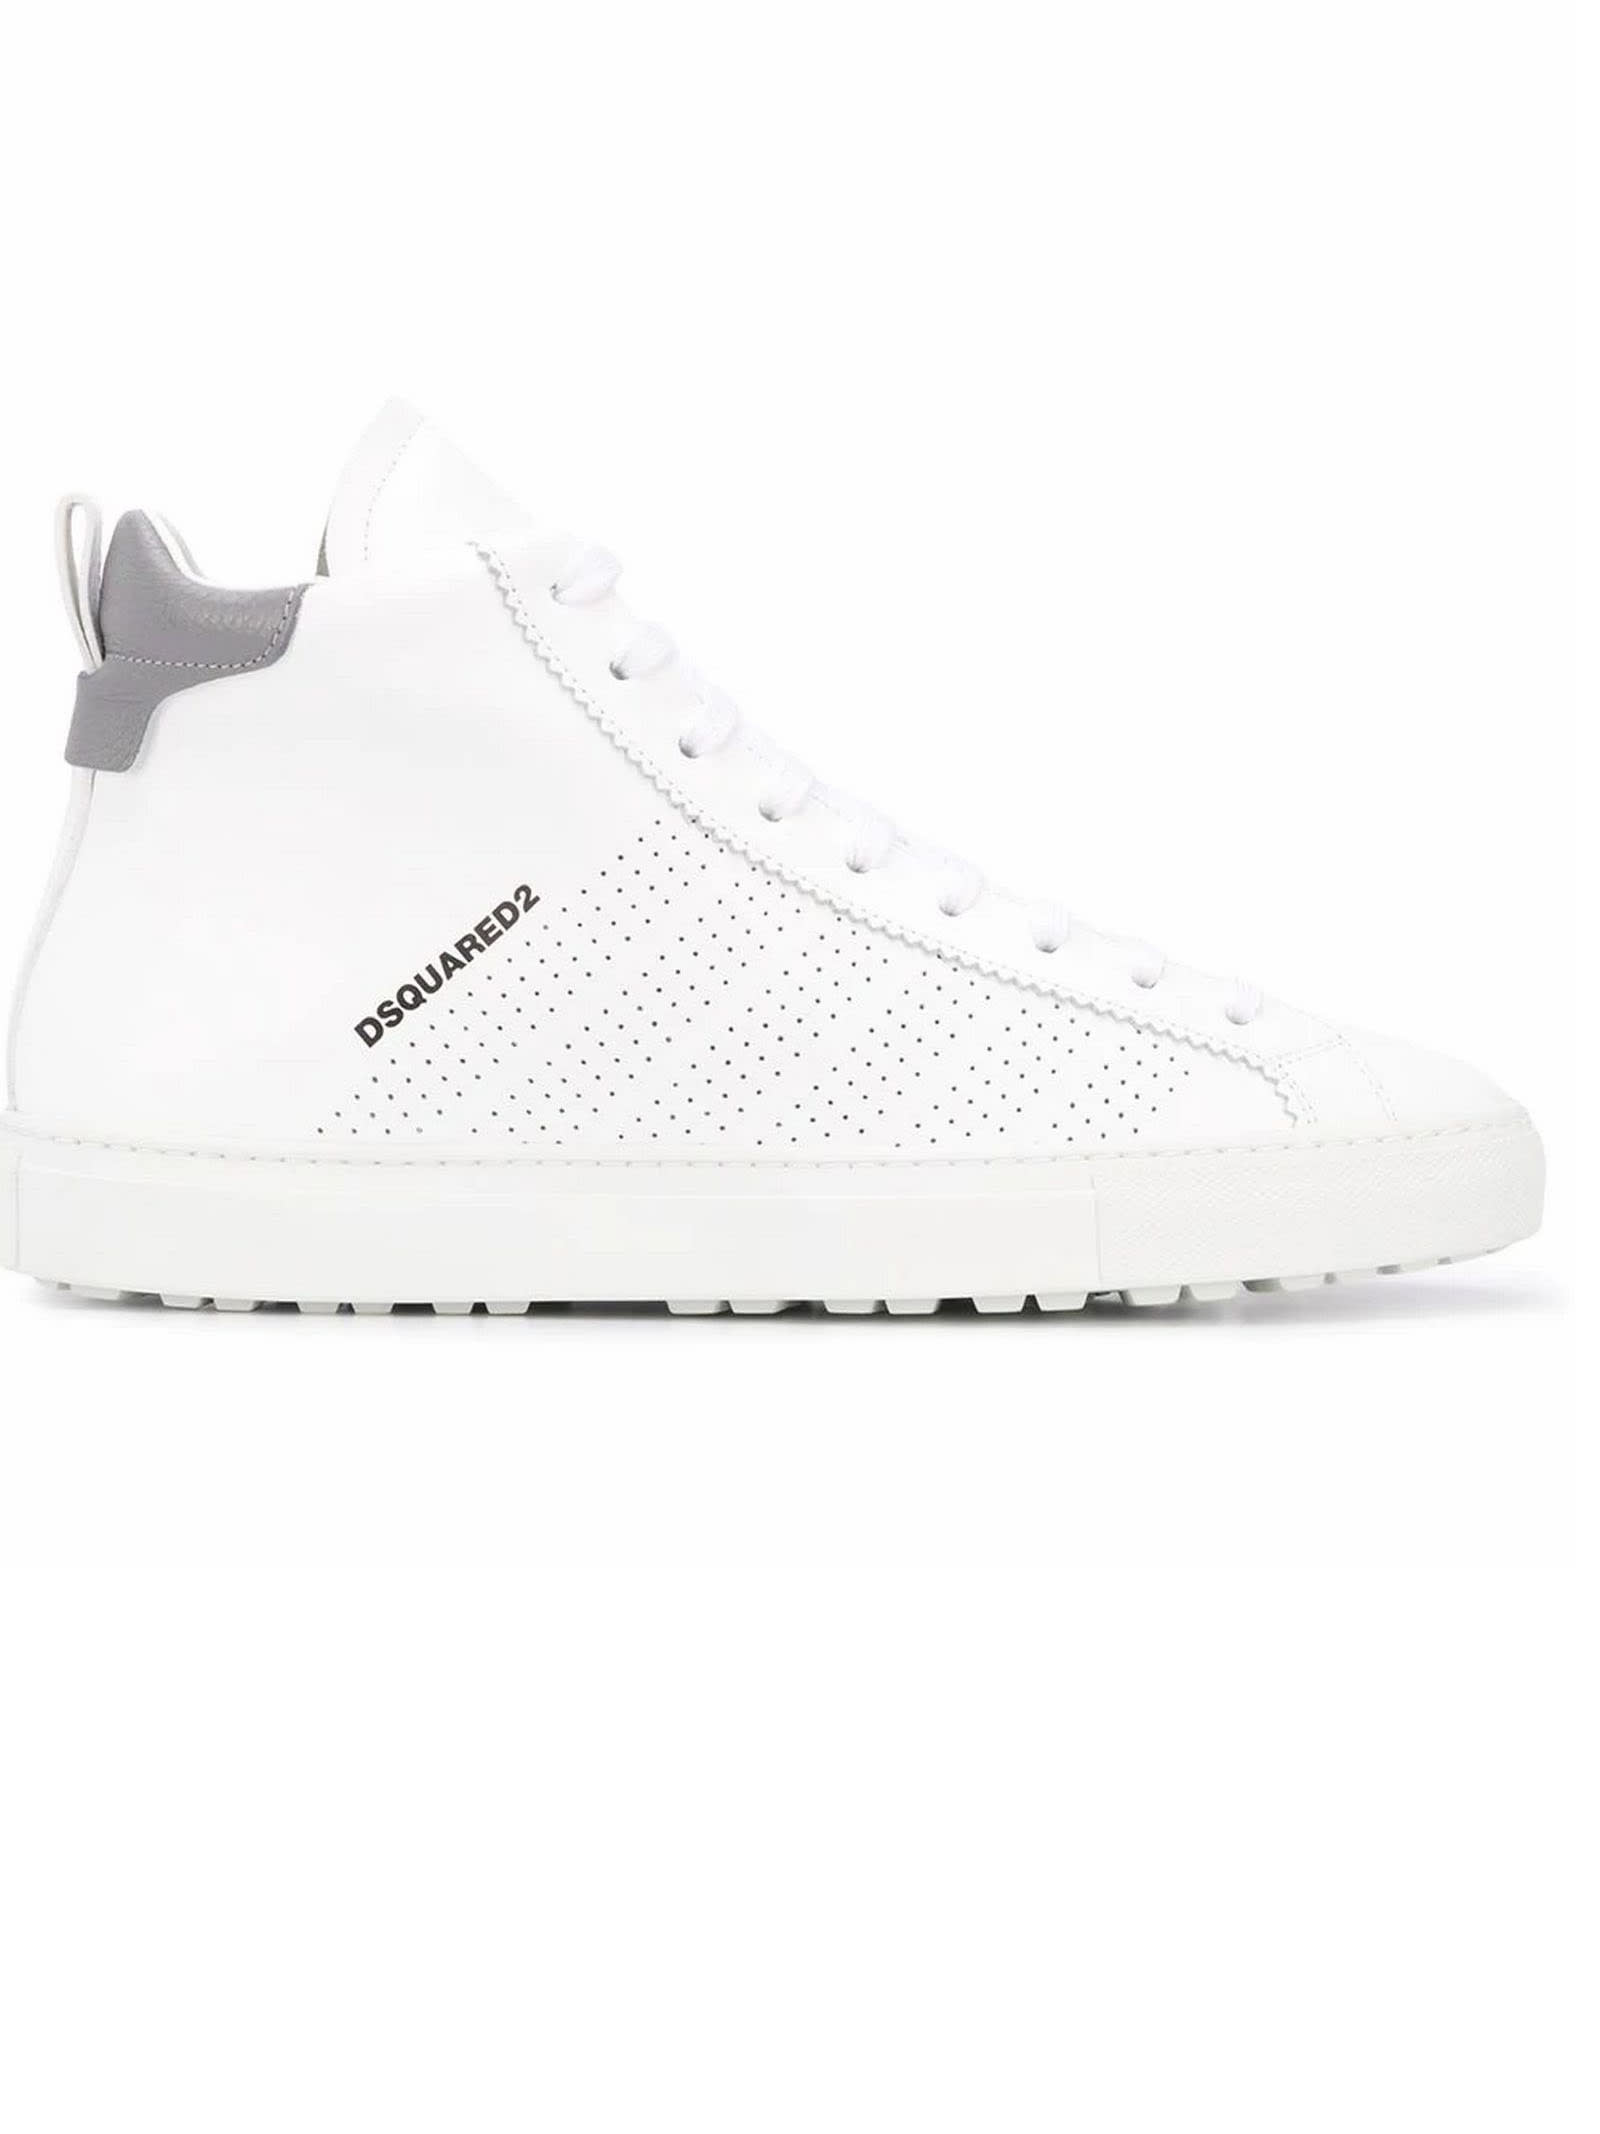 dsquared2 sneakers price